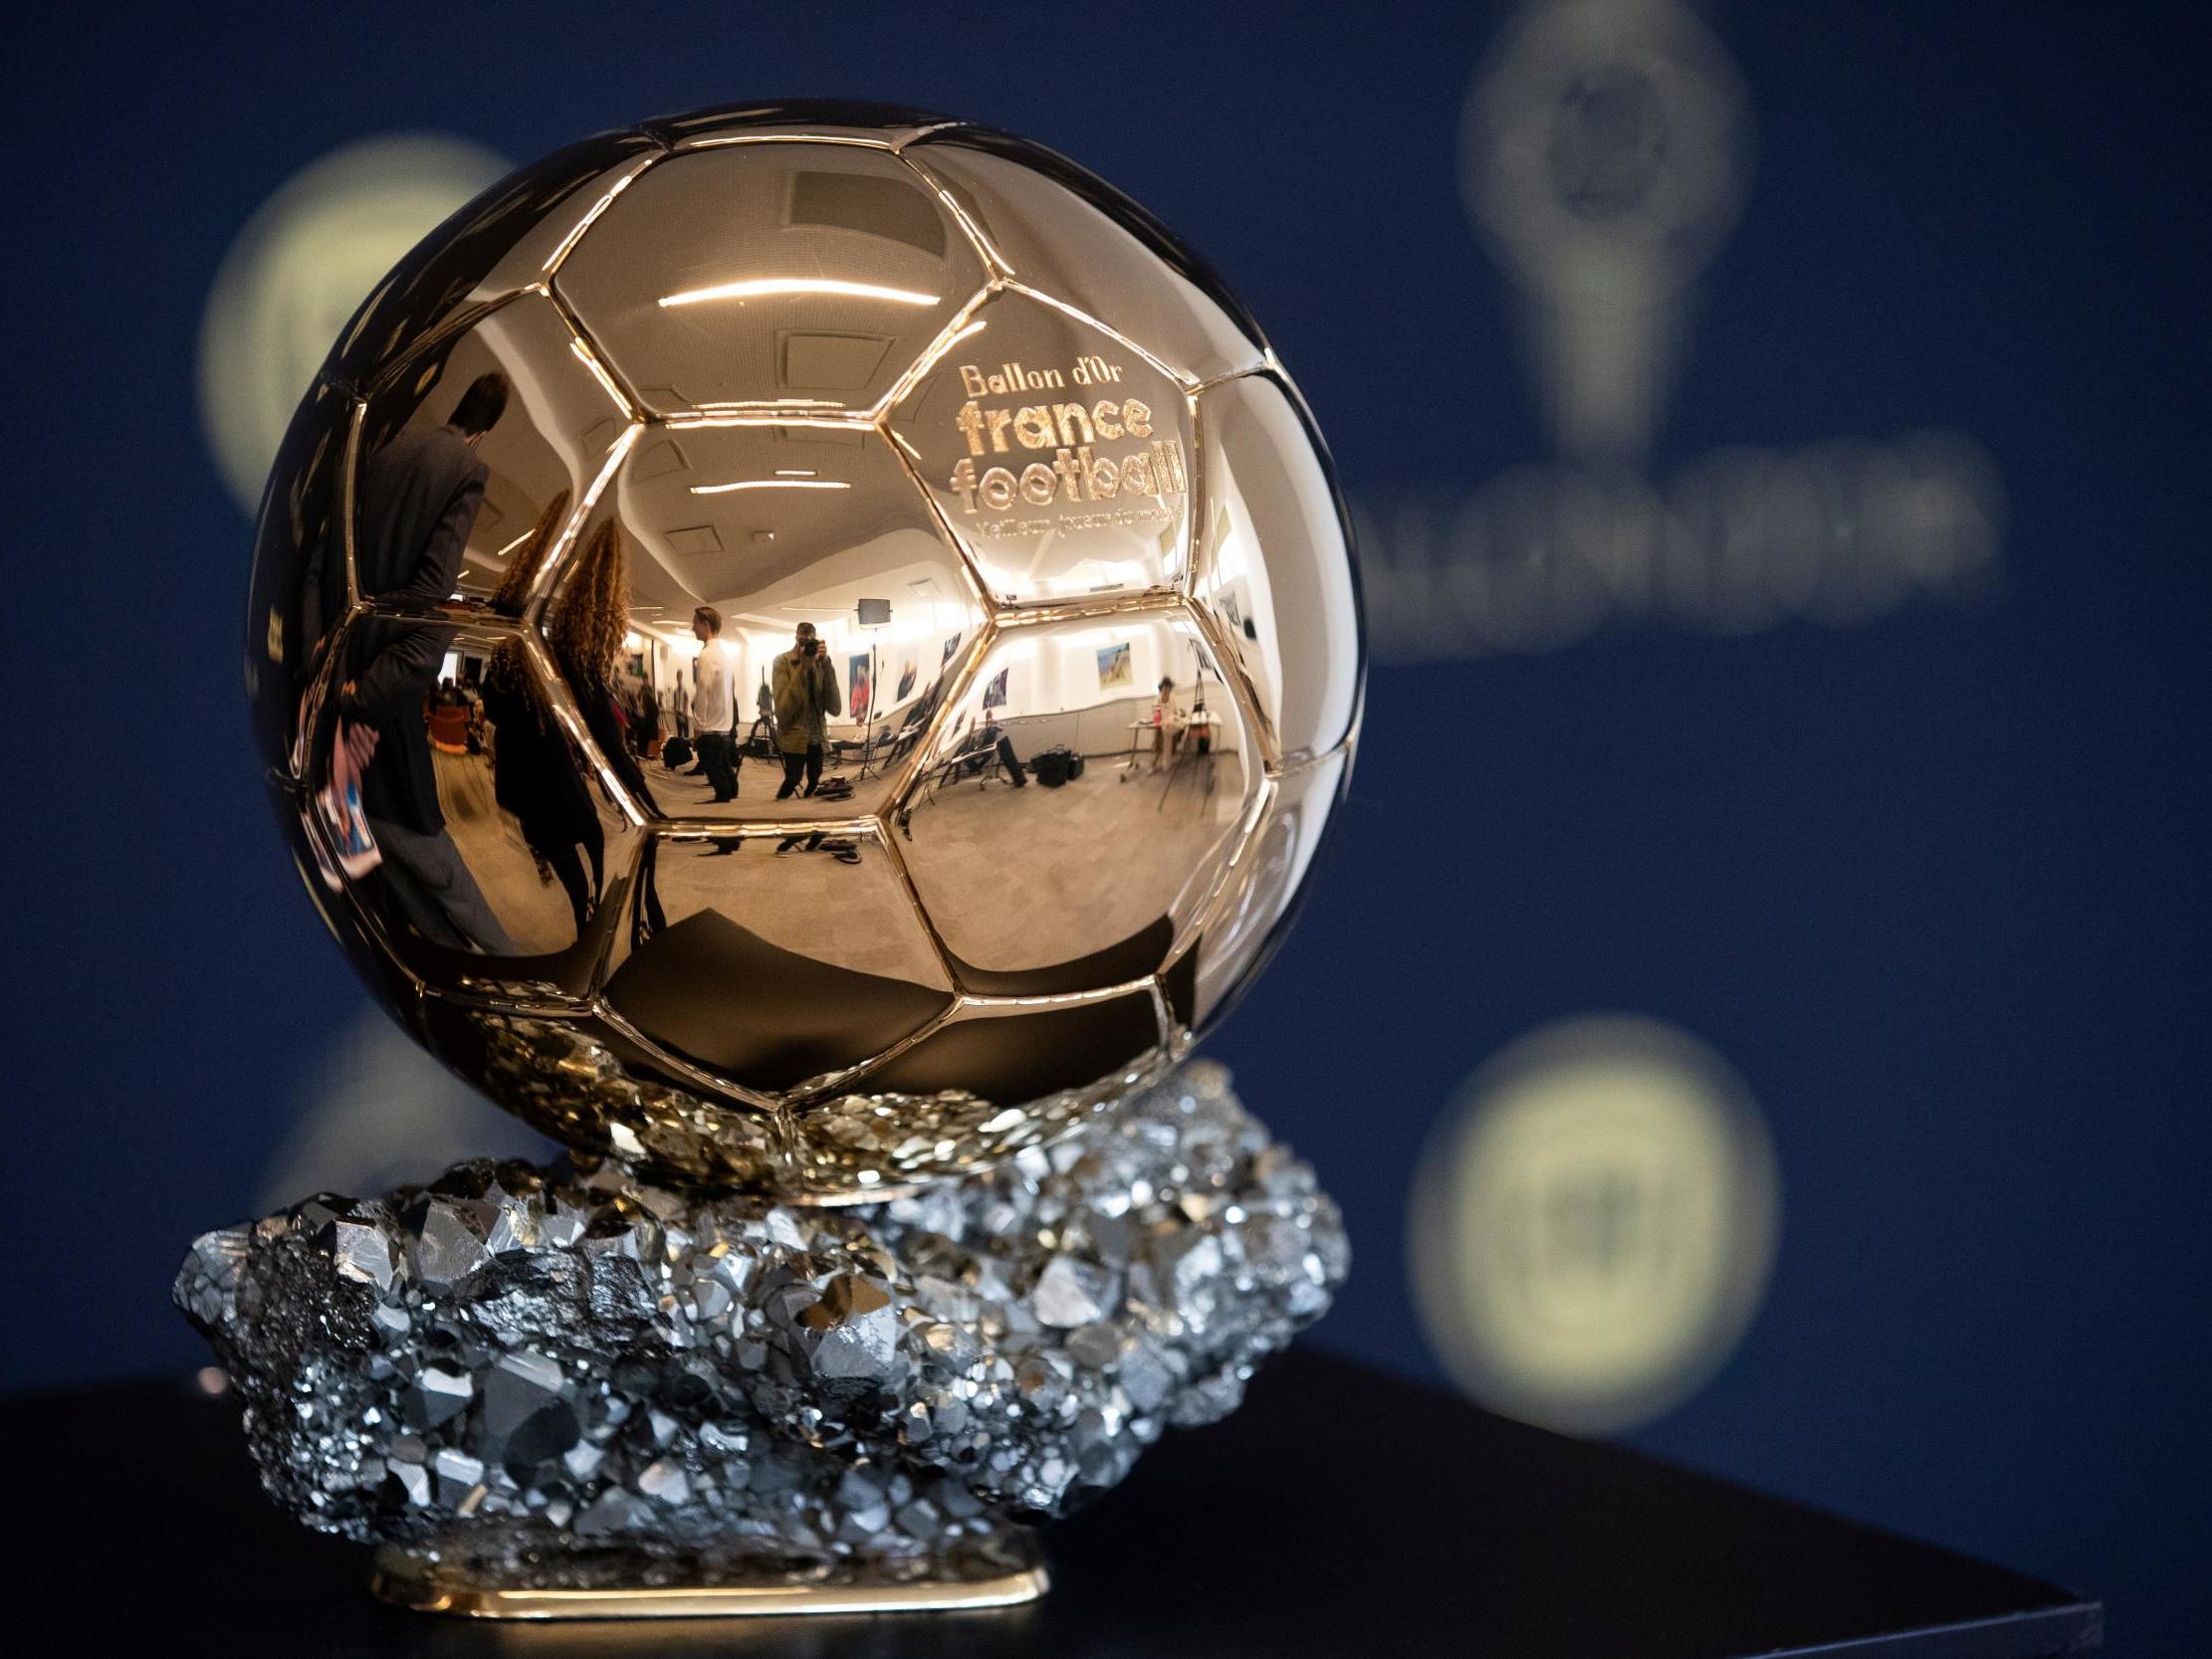 Ballon d'Or 2019: Starting time, shortlists and past winners